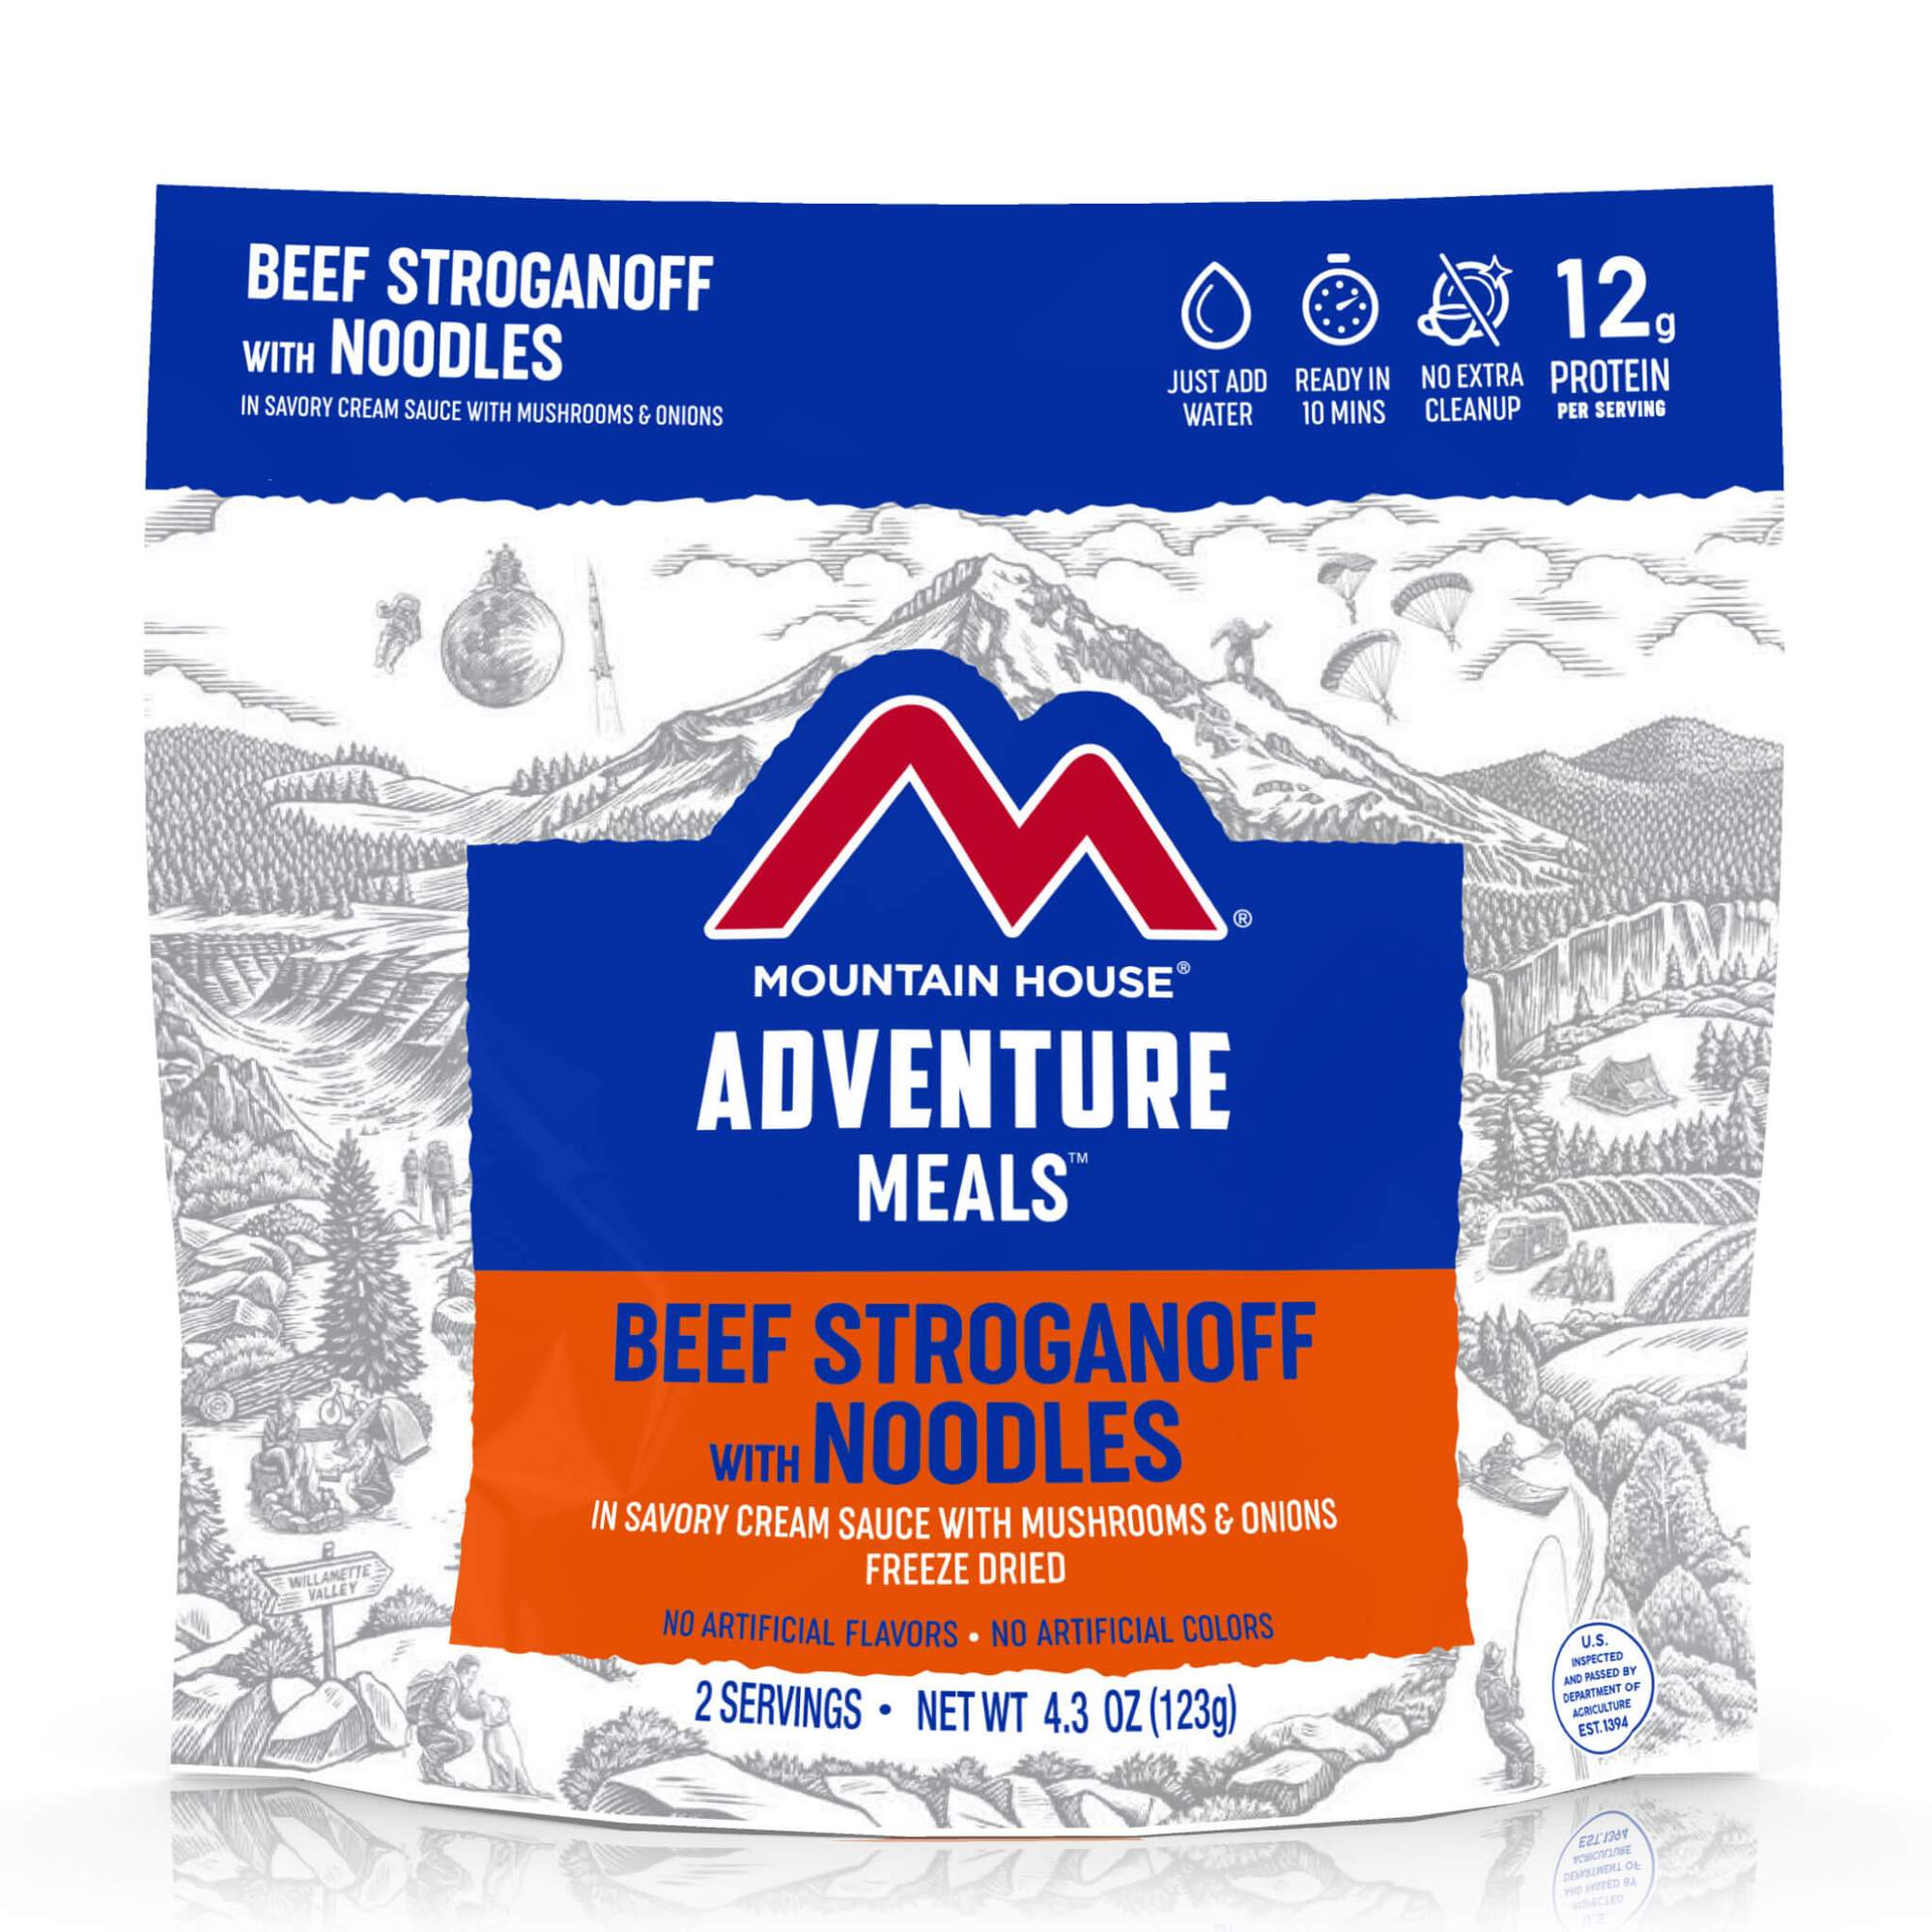 Mountain House Beef Stroganoff with Noodles 2021